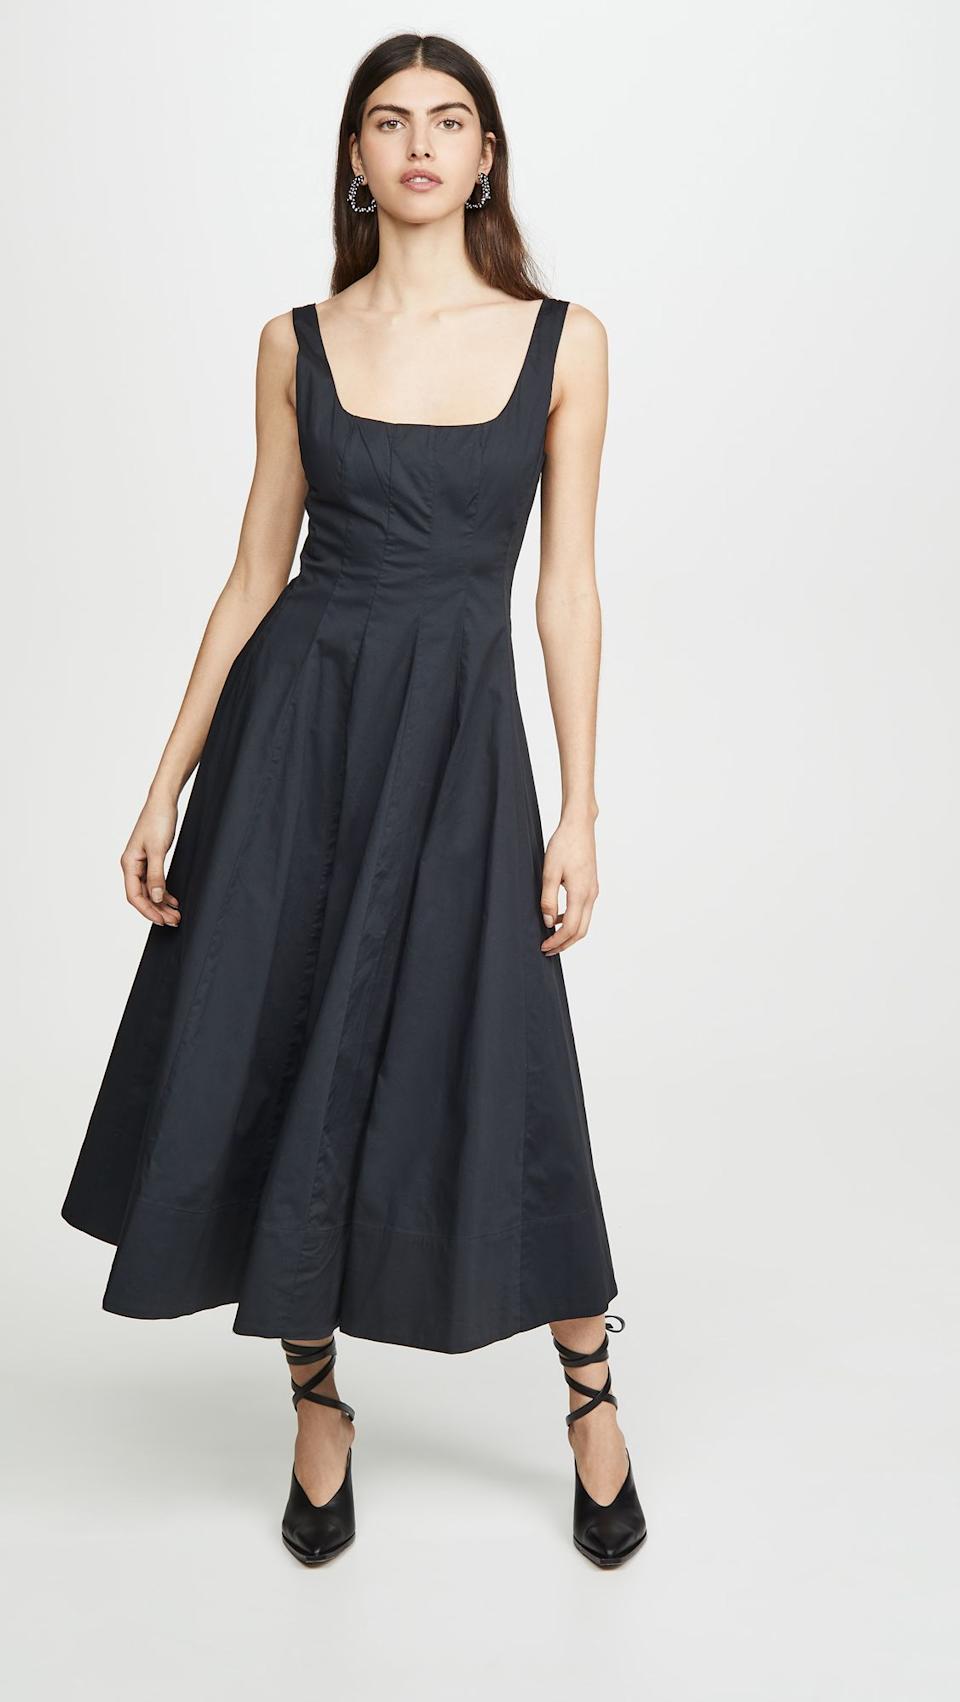 17 Black Dresses You Can Totally Wear to a Wedding